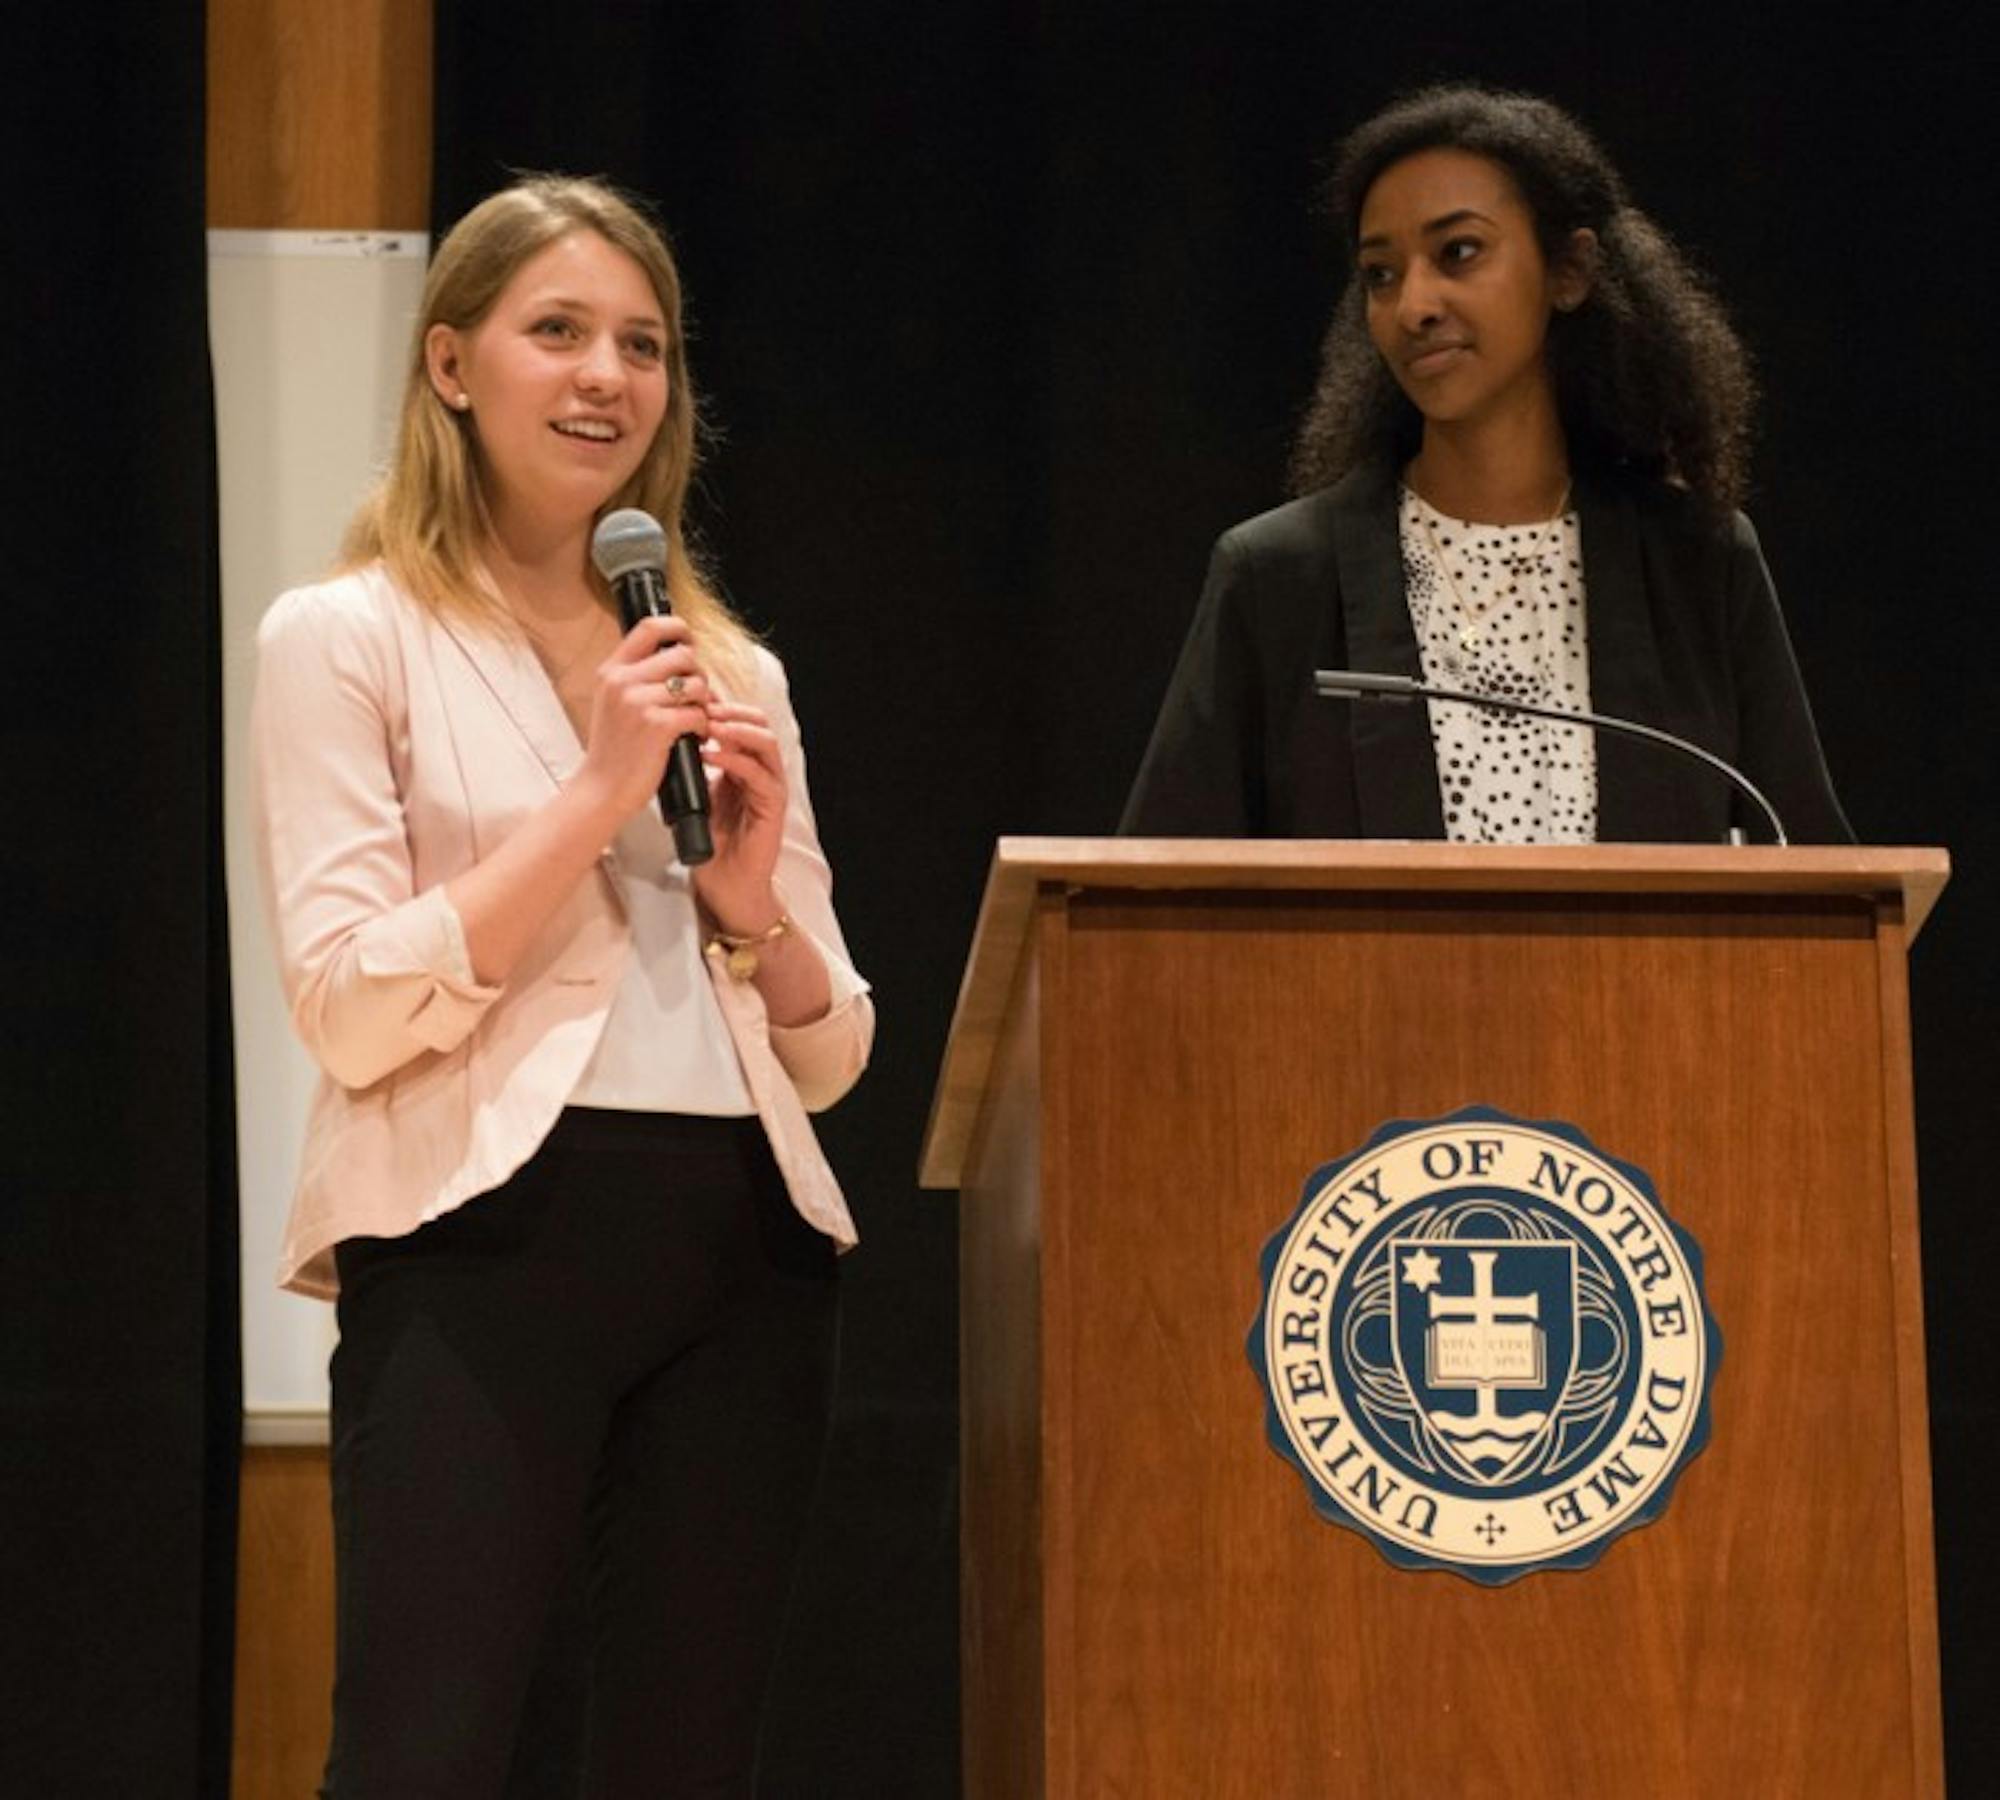 Juniors Becca Blais, left, and Sibonay Shewit speak at the student body president debate Monday at Carey Auditorium. Students voted Wednesday, electing Blais the next president and Shewit the next vice president.